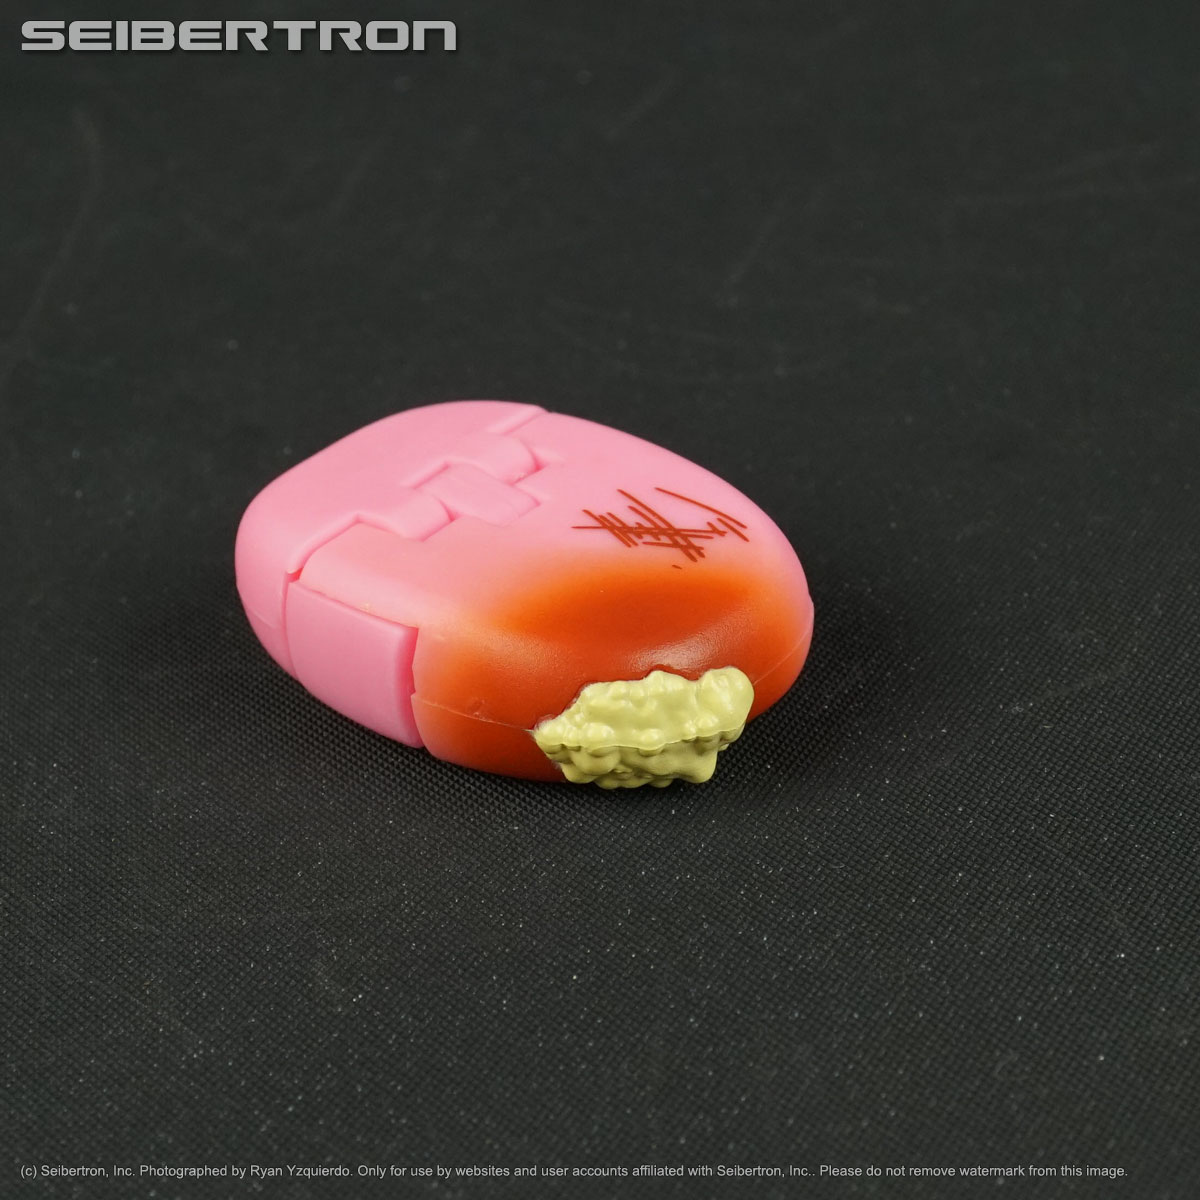 Transformers, Masters of the Universe, Teenage Mutant Ninja Turtles, Gobots, Comic Books, Shopkins, and other listings from Seibertron.com: NOPE SOAP Transformers BotBots Series 2 Toilet Troop 2019 used bar soap